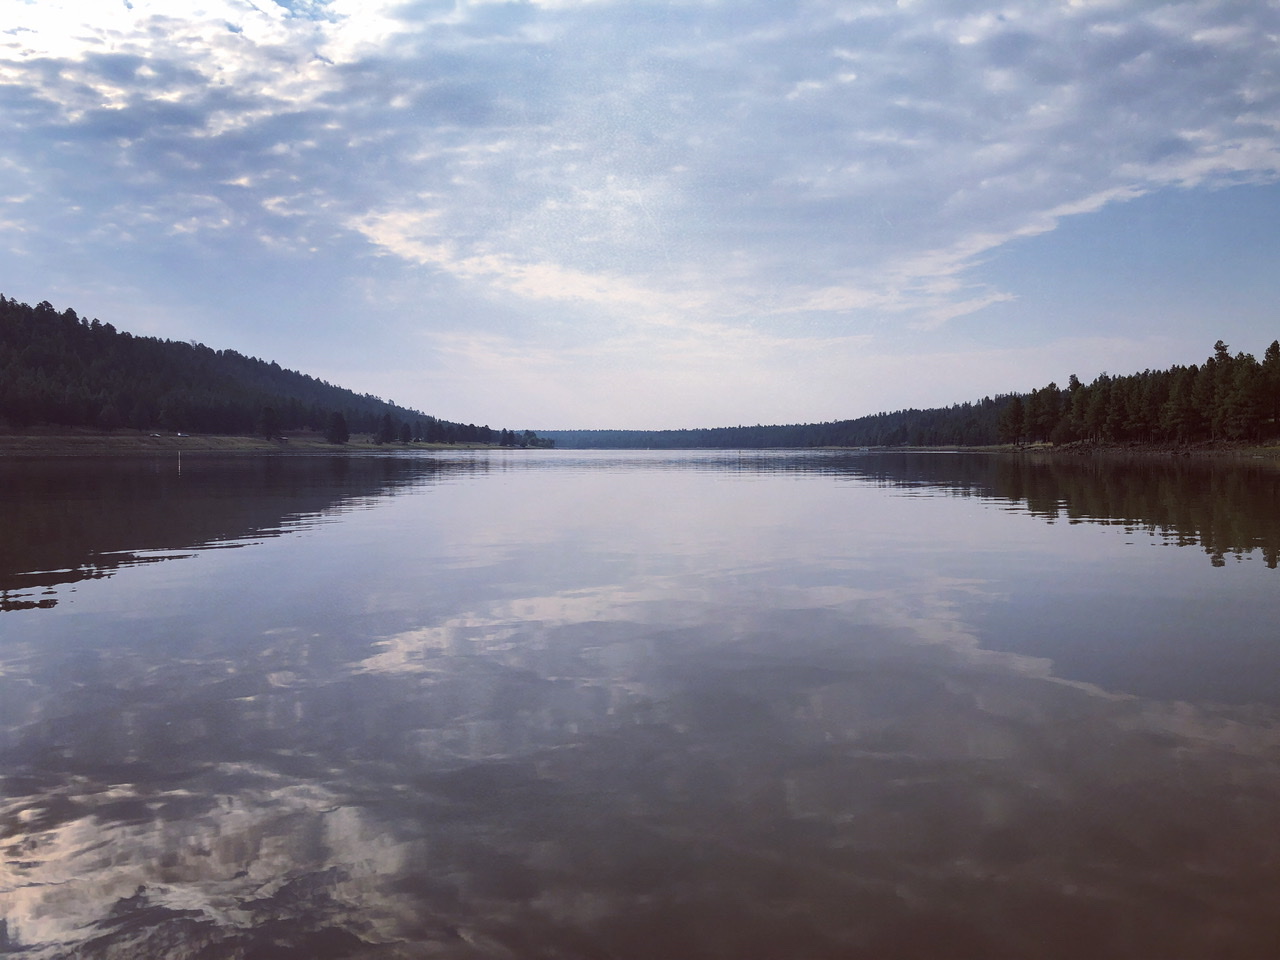 A view across a lake, with clouds and trees reflected in the water 